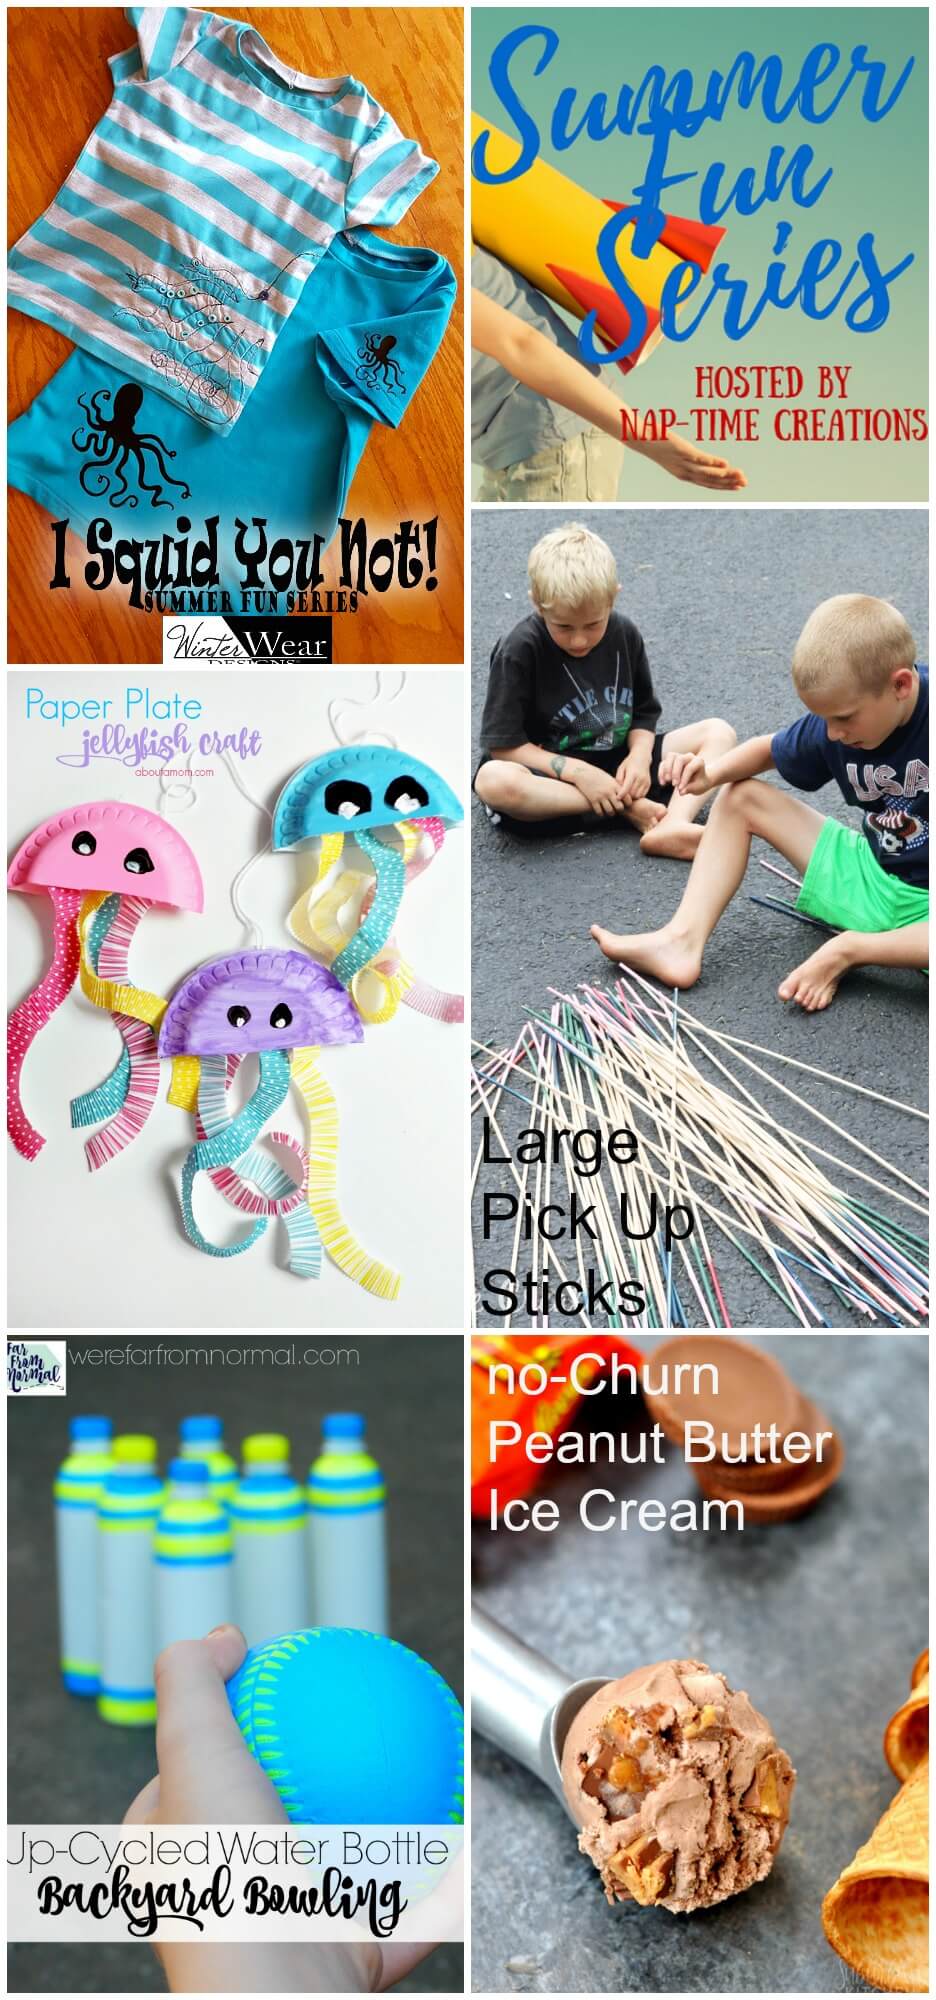 Large Pick Up Sticks and Summer fun #5 on Nap-Time Creations.com